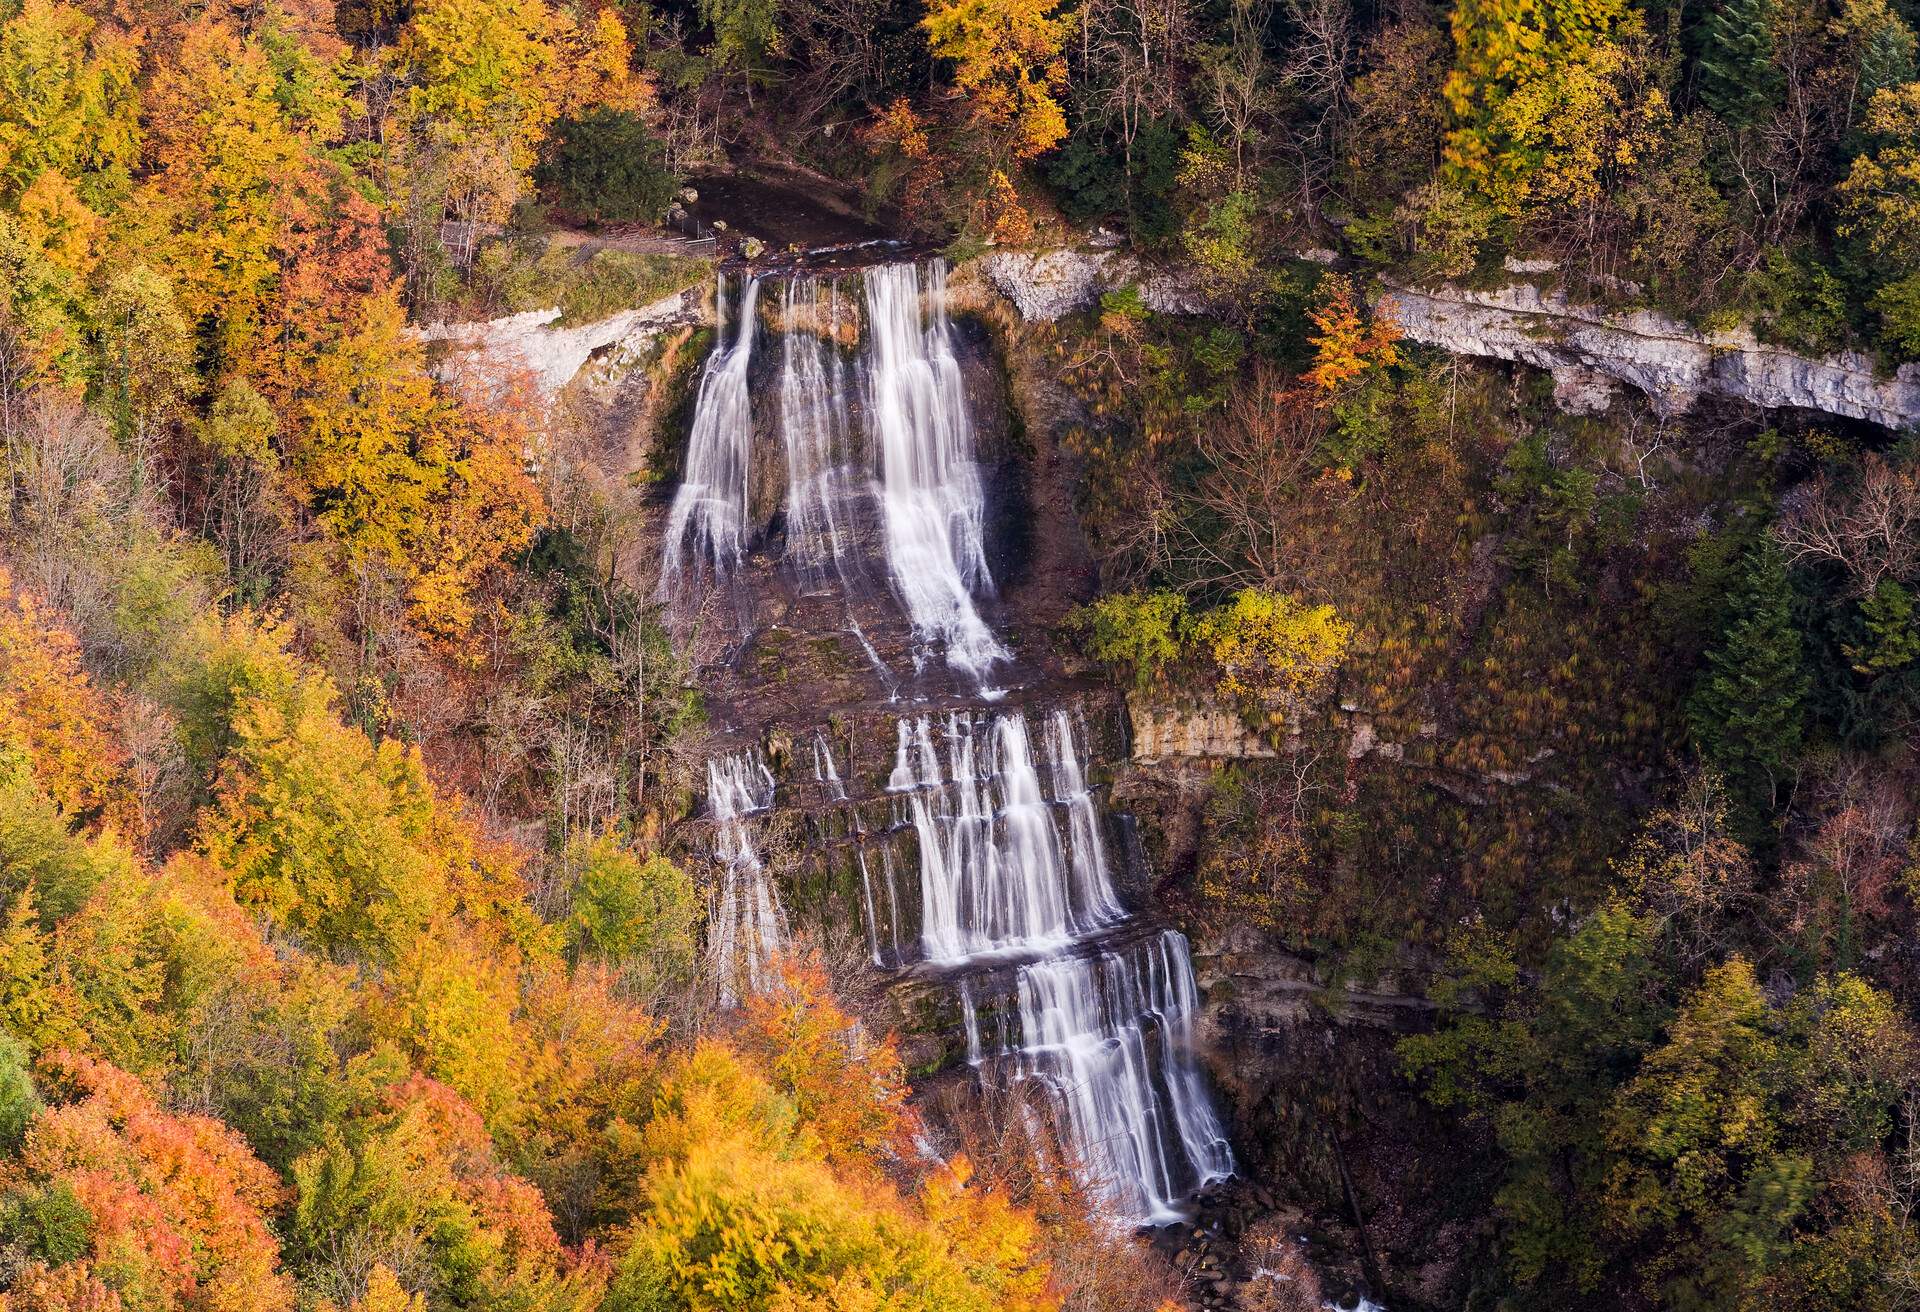 A low-volume waterfall surrounded by vibrant fall foliage.